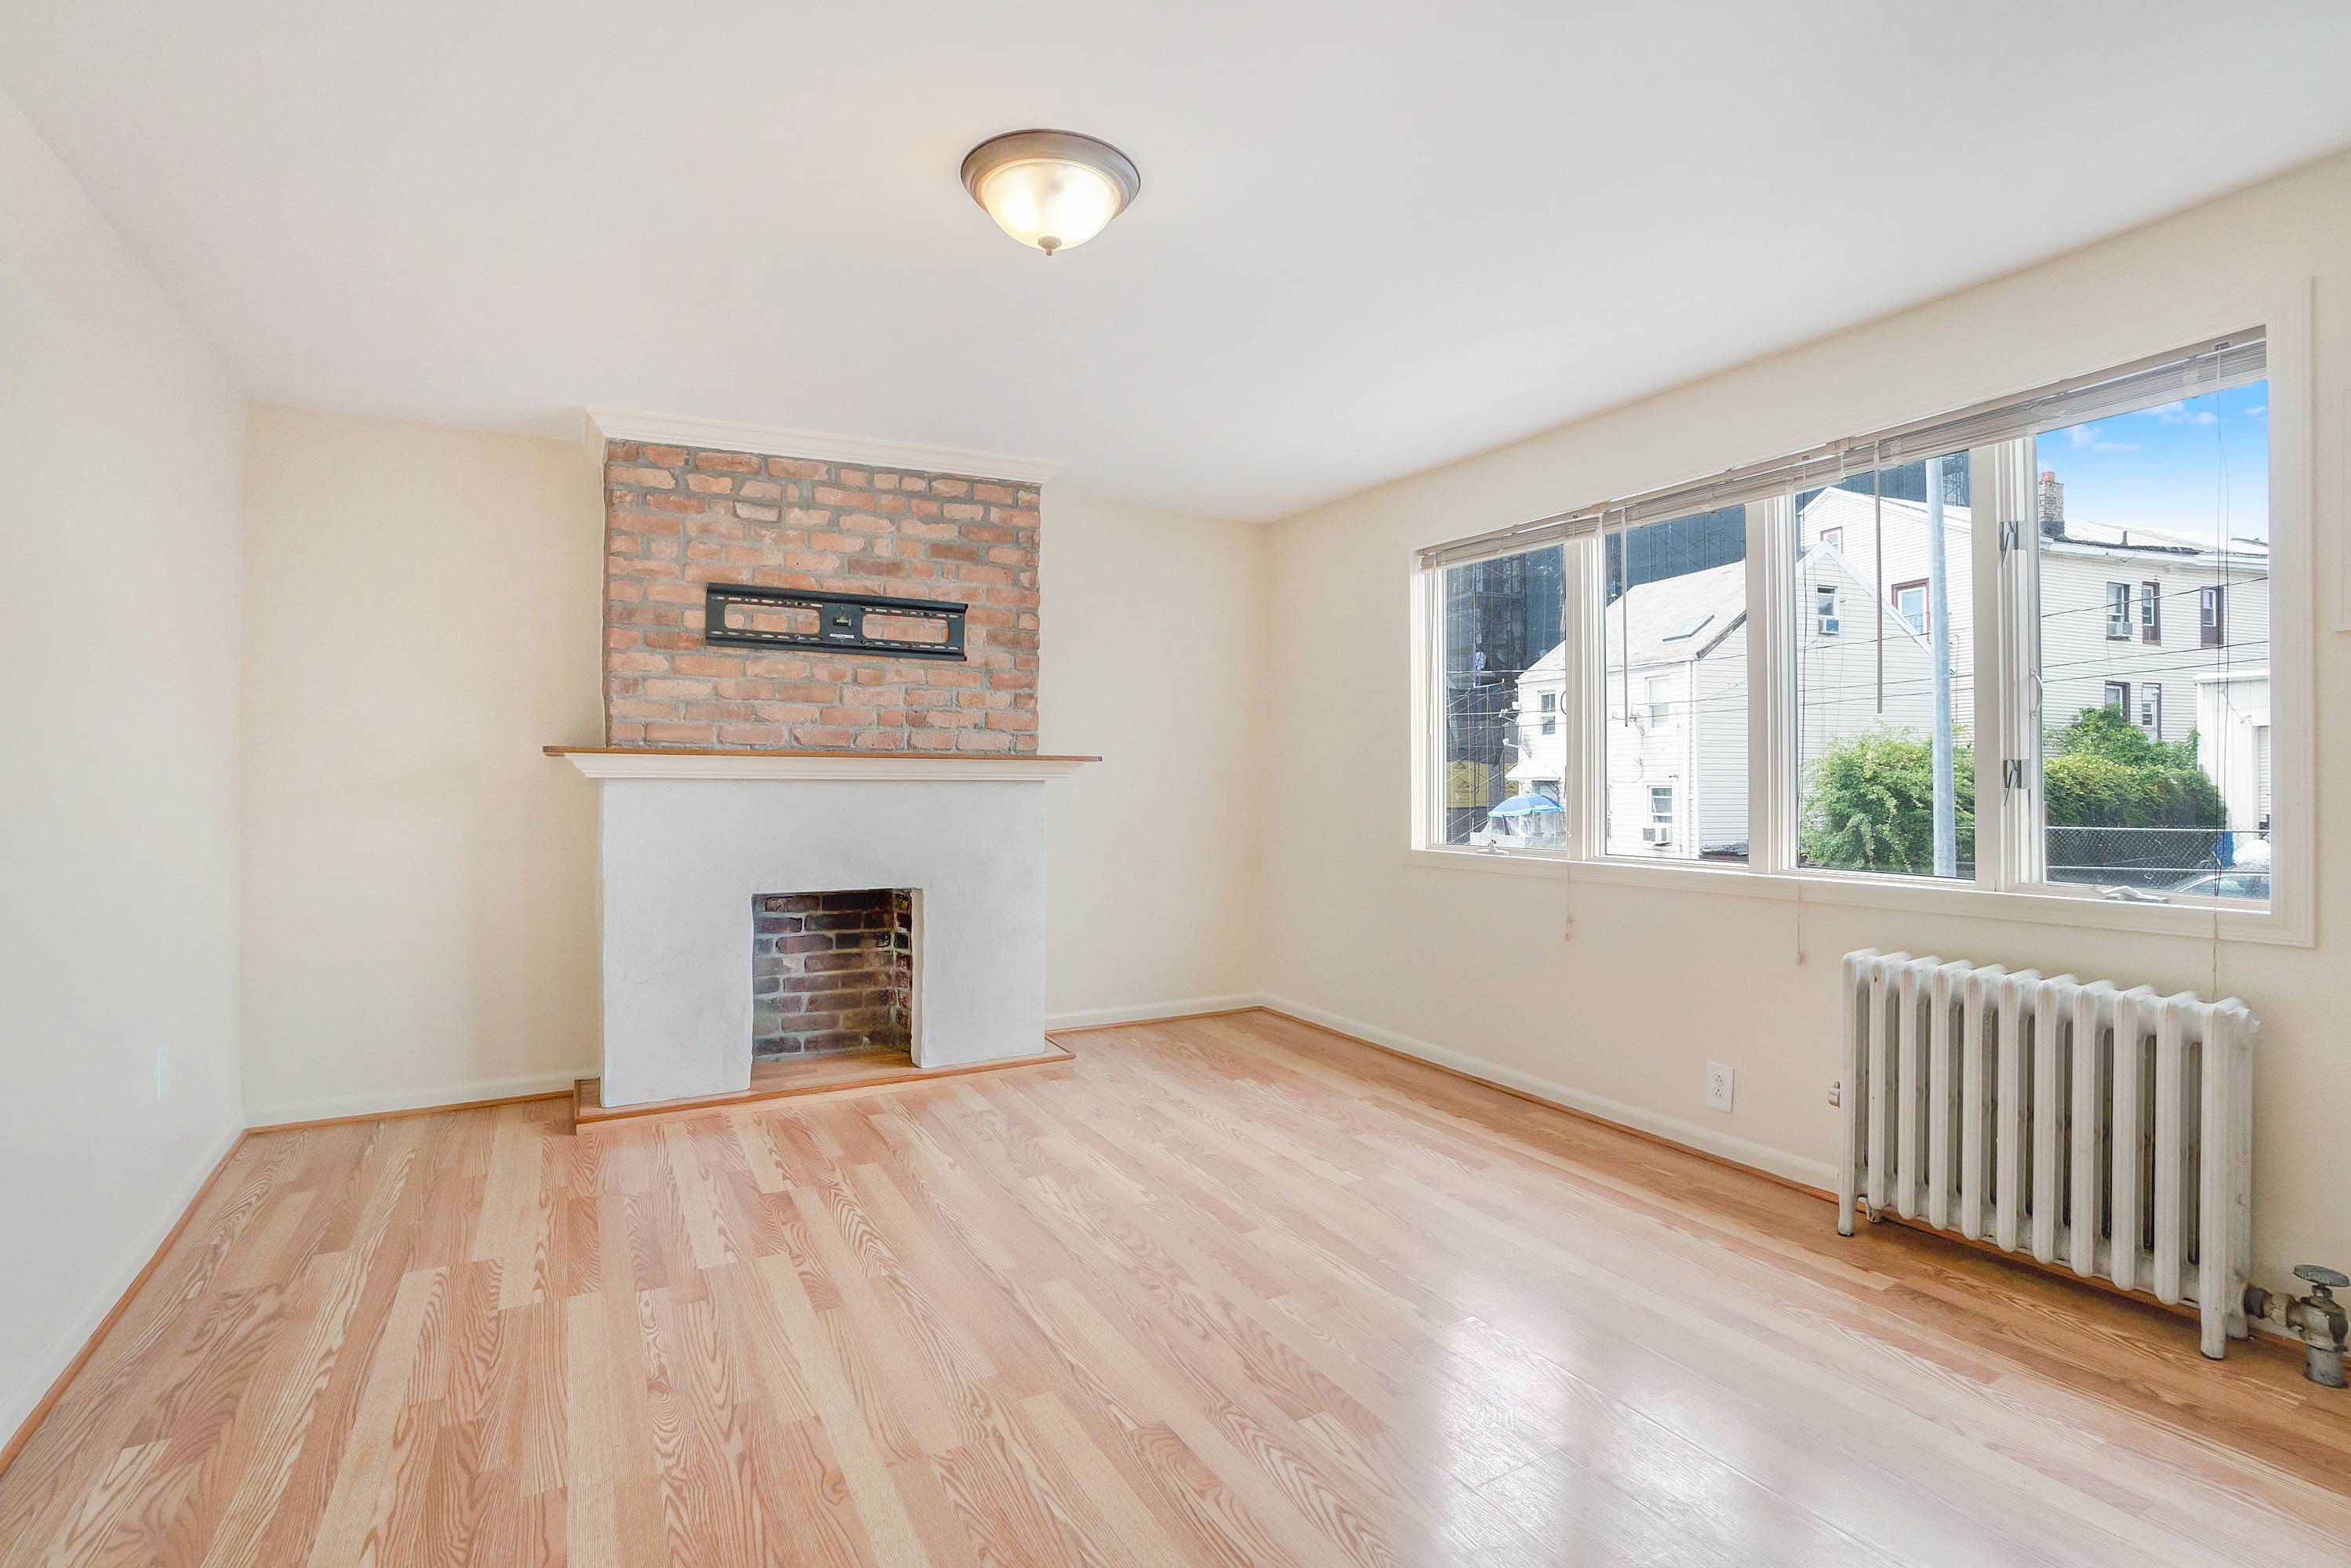 Astoria: Top Floor Pet Friendly 1 Bed 1 Bath with a Finished Attic